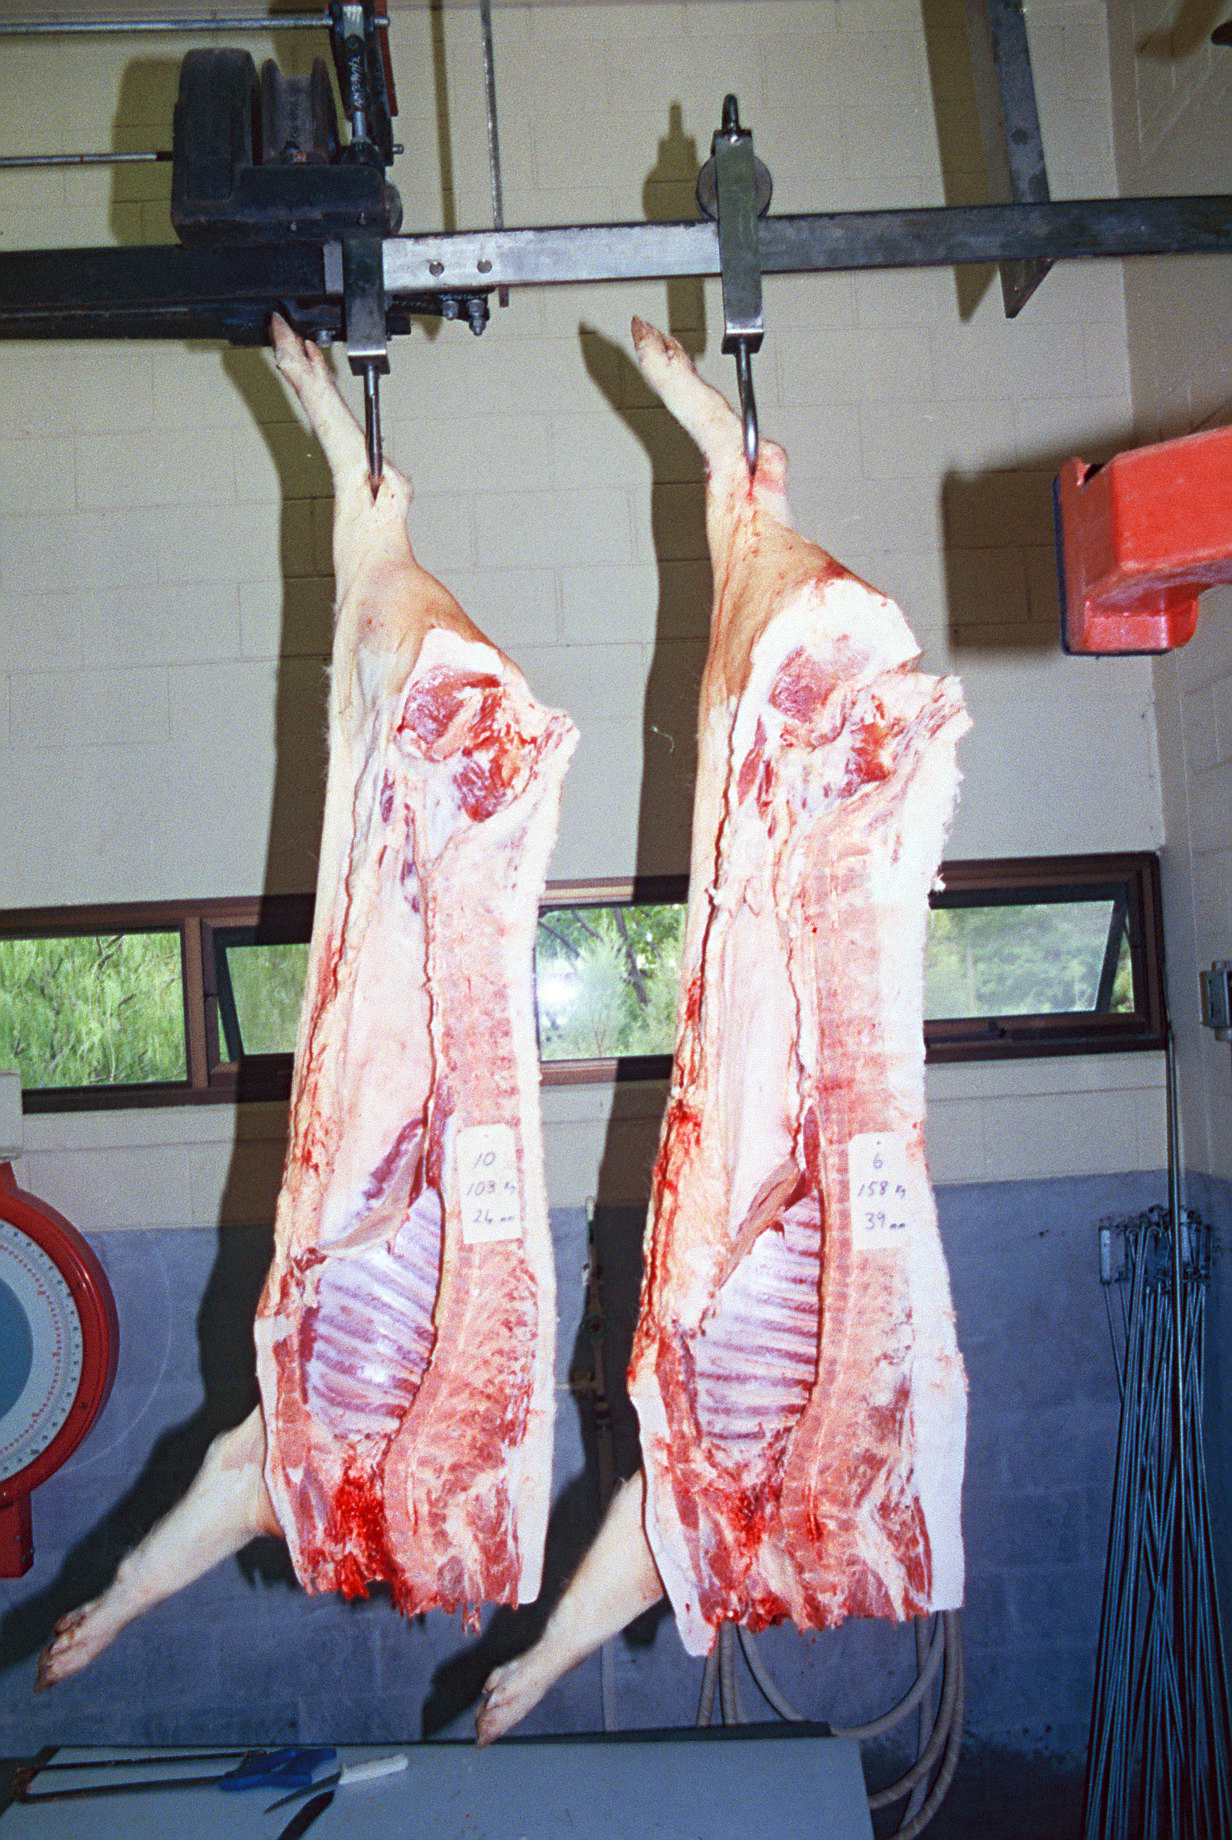 Controlling high backfat (P2) in finisher pigs | Agriculture and Food